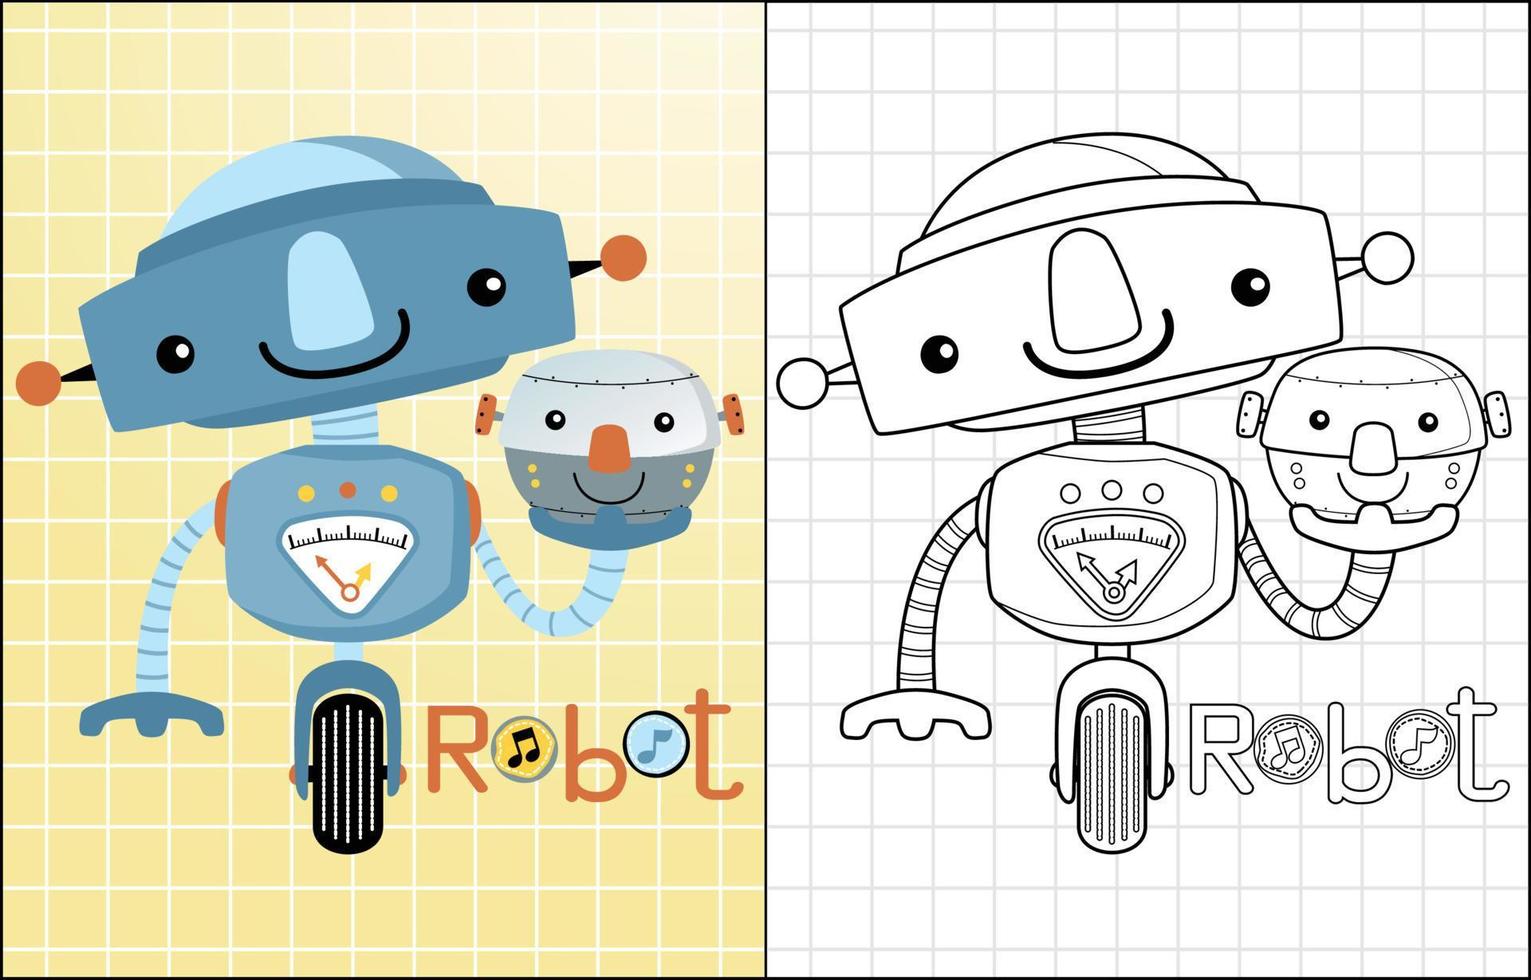 Vector illustration of funny robots cartoon, coloring book or page